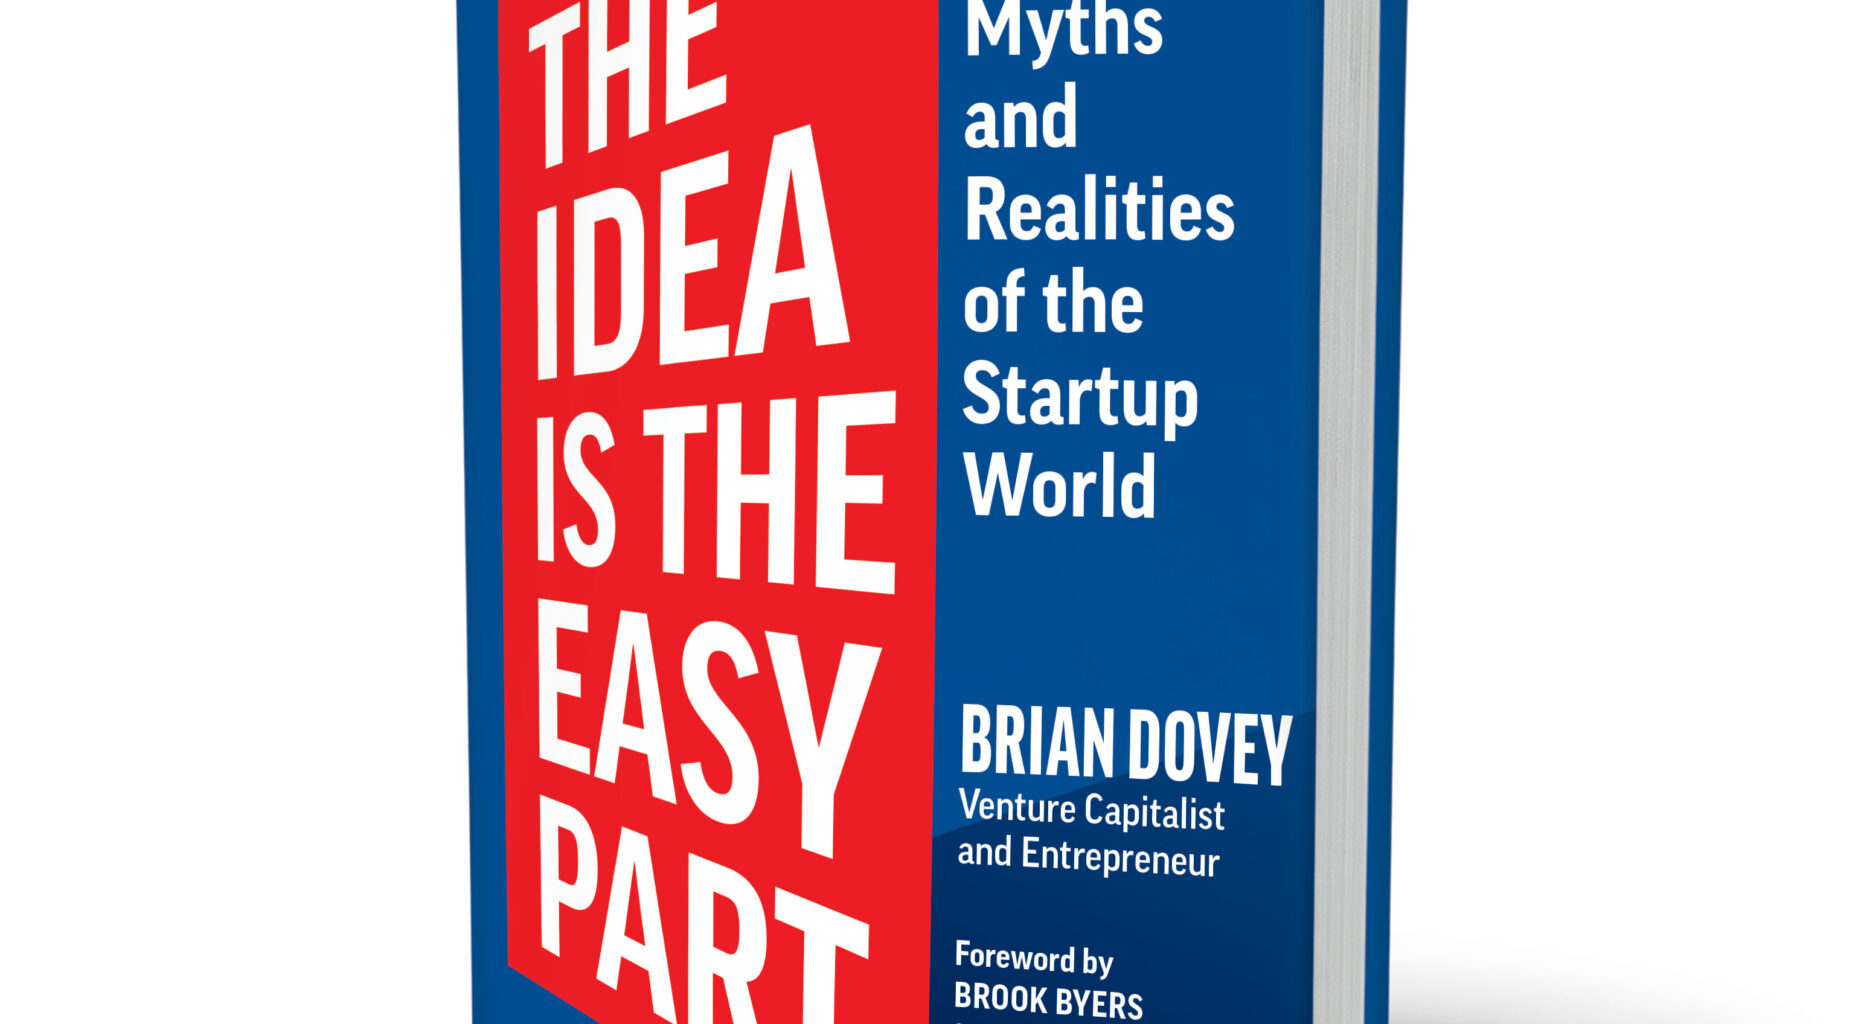 What Makes a Good Idea for a Startup? From 'Myths and Realities of the ...